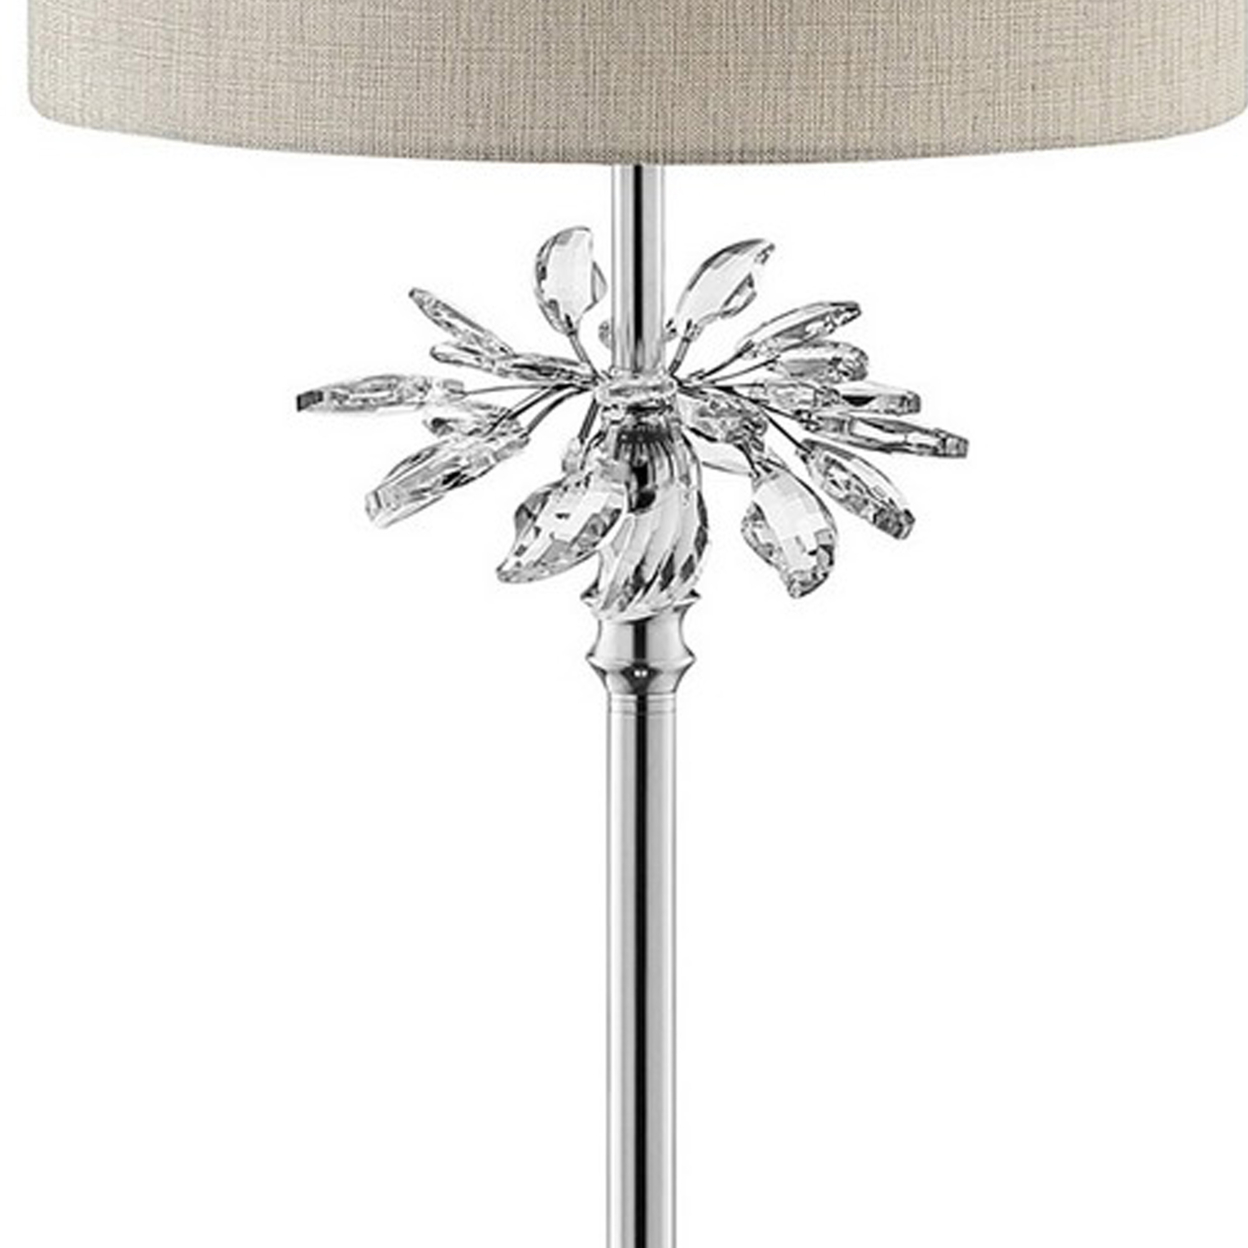 Floor Lamp With Starburst Crystal Accent, Gray And Silver- Saltoro Sherpi